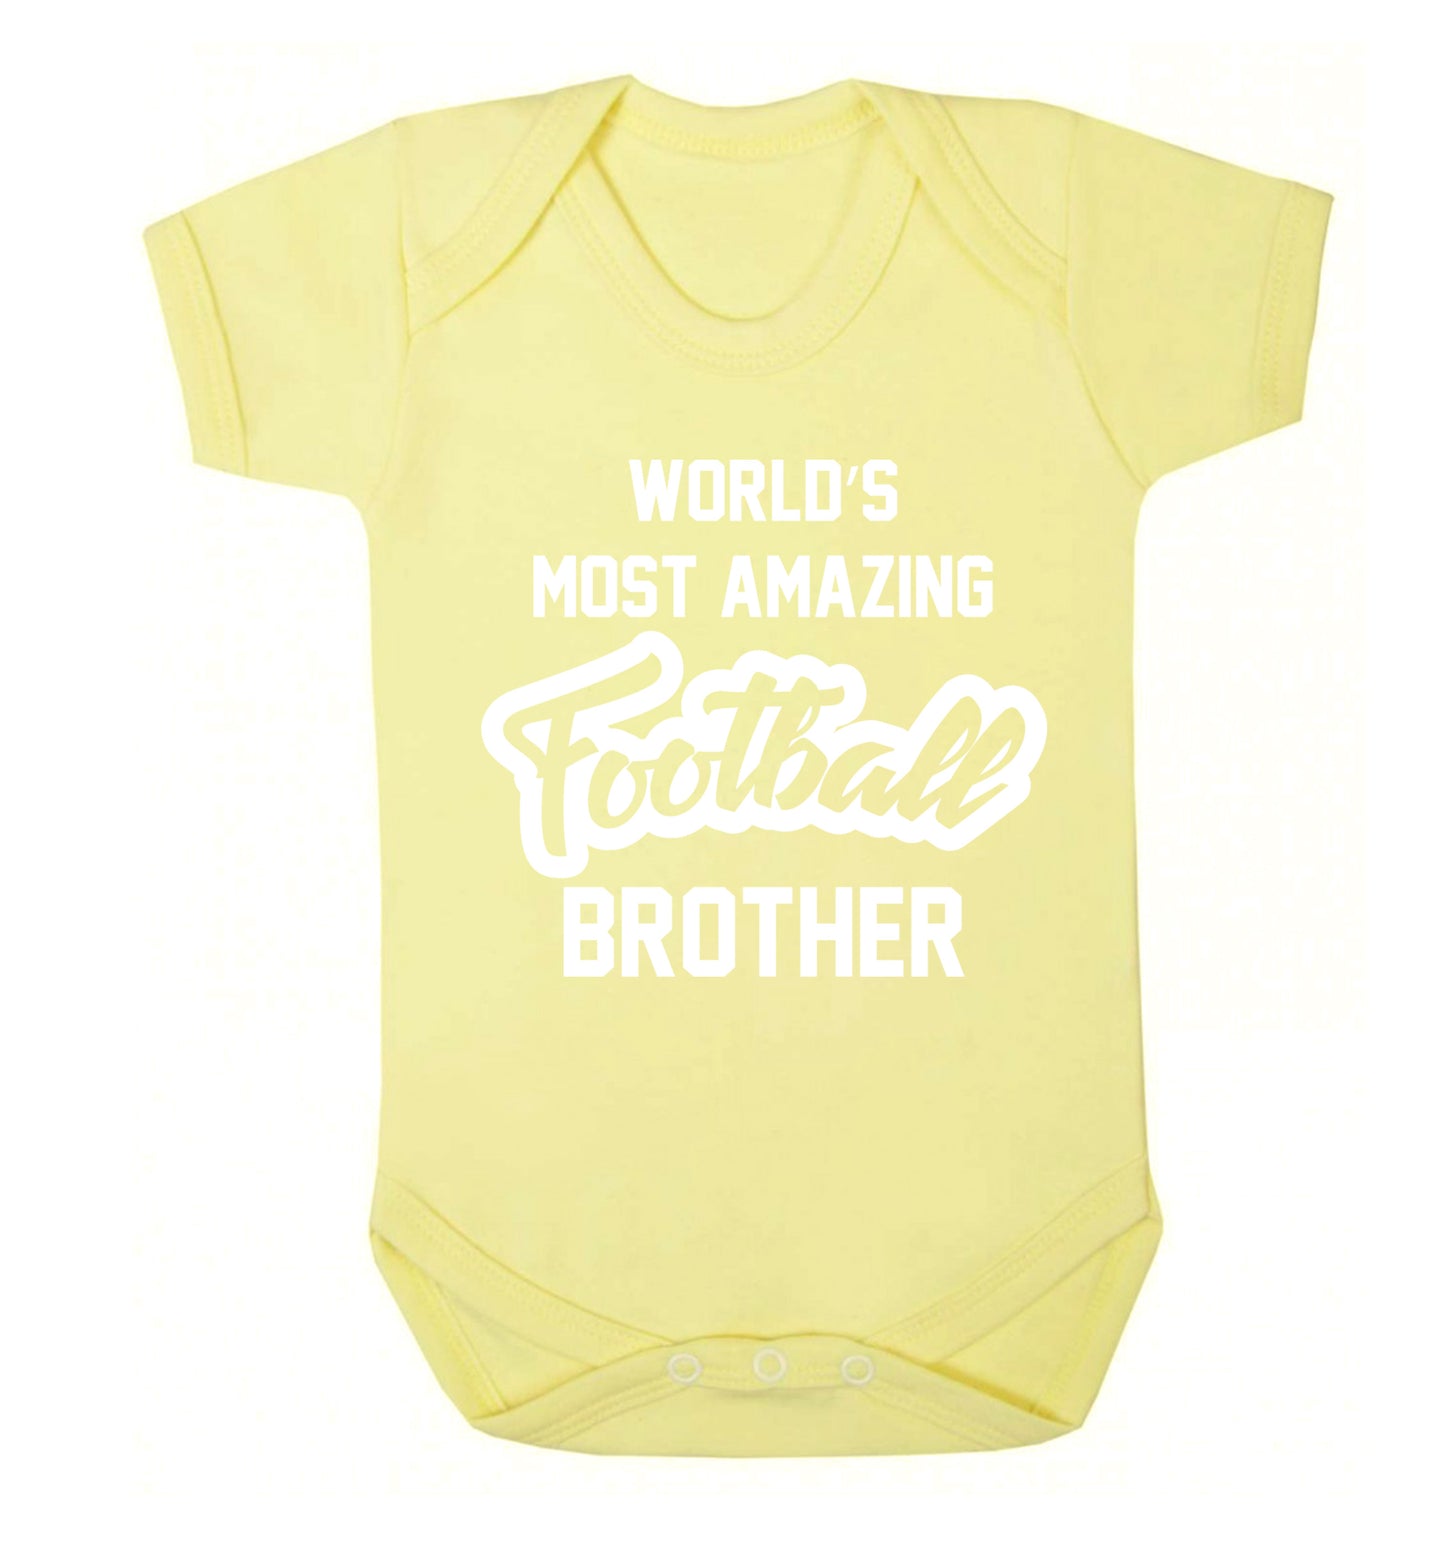 Worlds most amazing football brother Baby Vest pale yellow 18-24 months